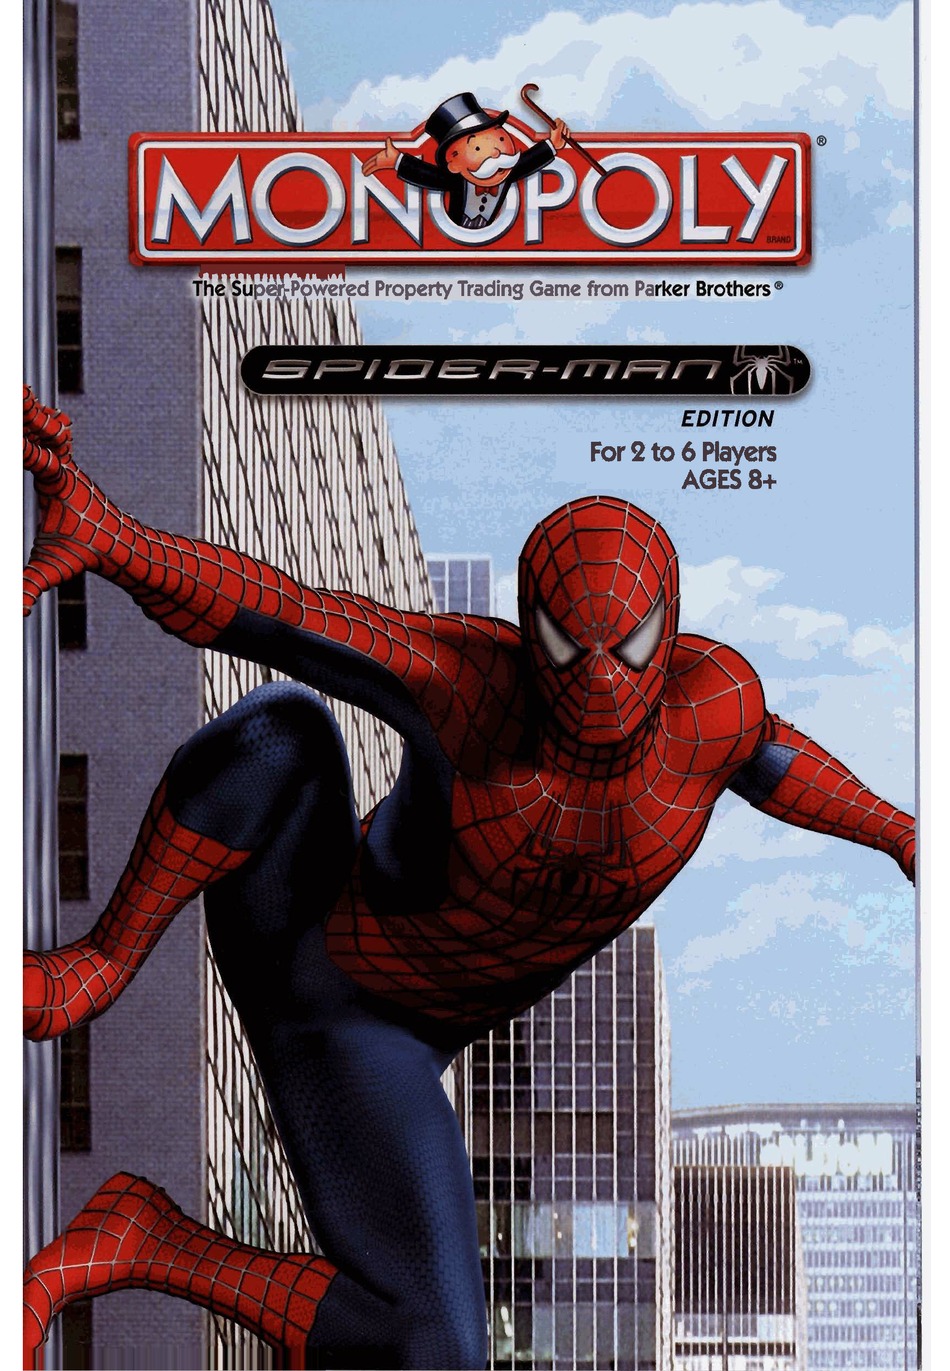 FROM SPIDER-MAN 3 MOVIE SPIDER-MAN MONOPOLY NIB 2006 6 COLLECTIBLE TOKENS 